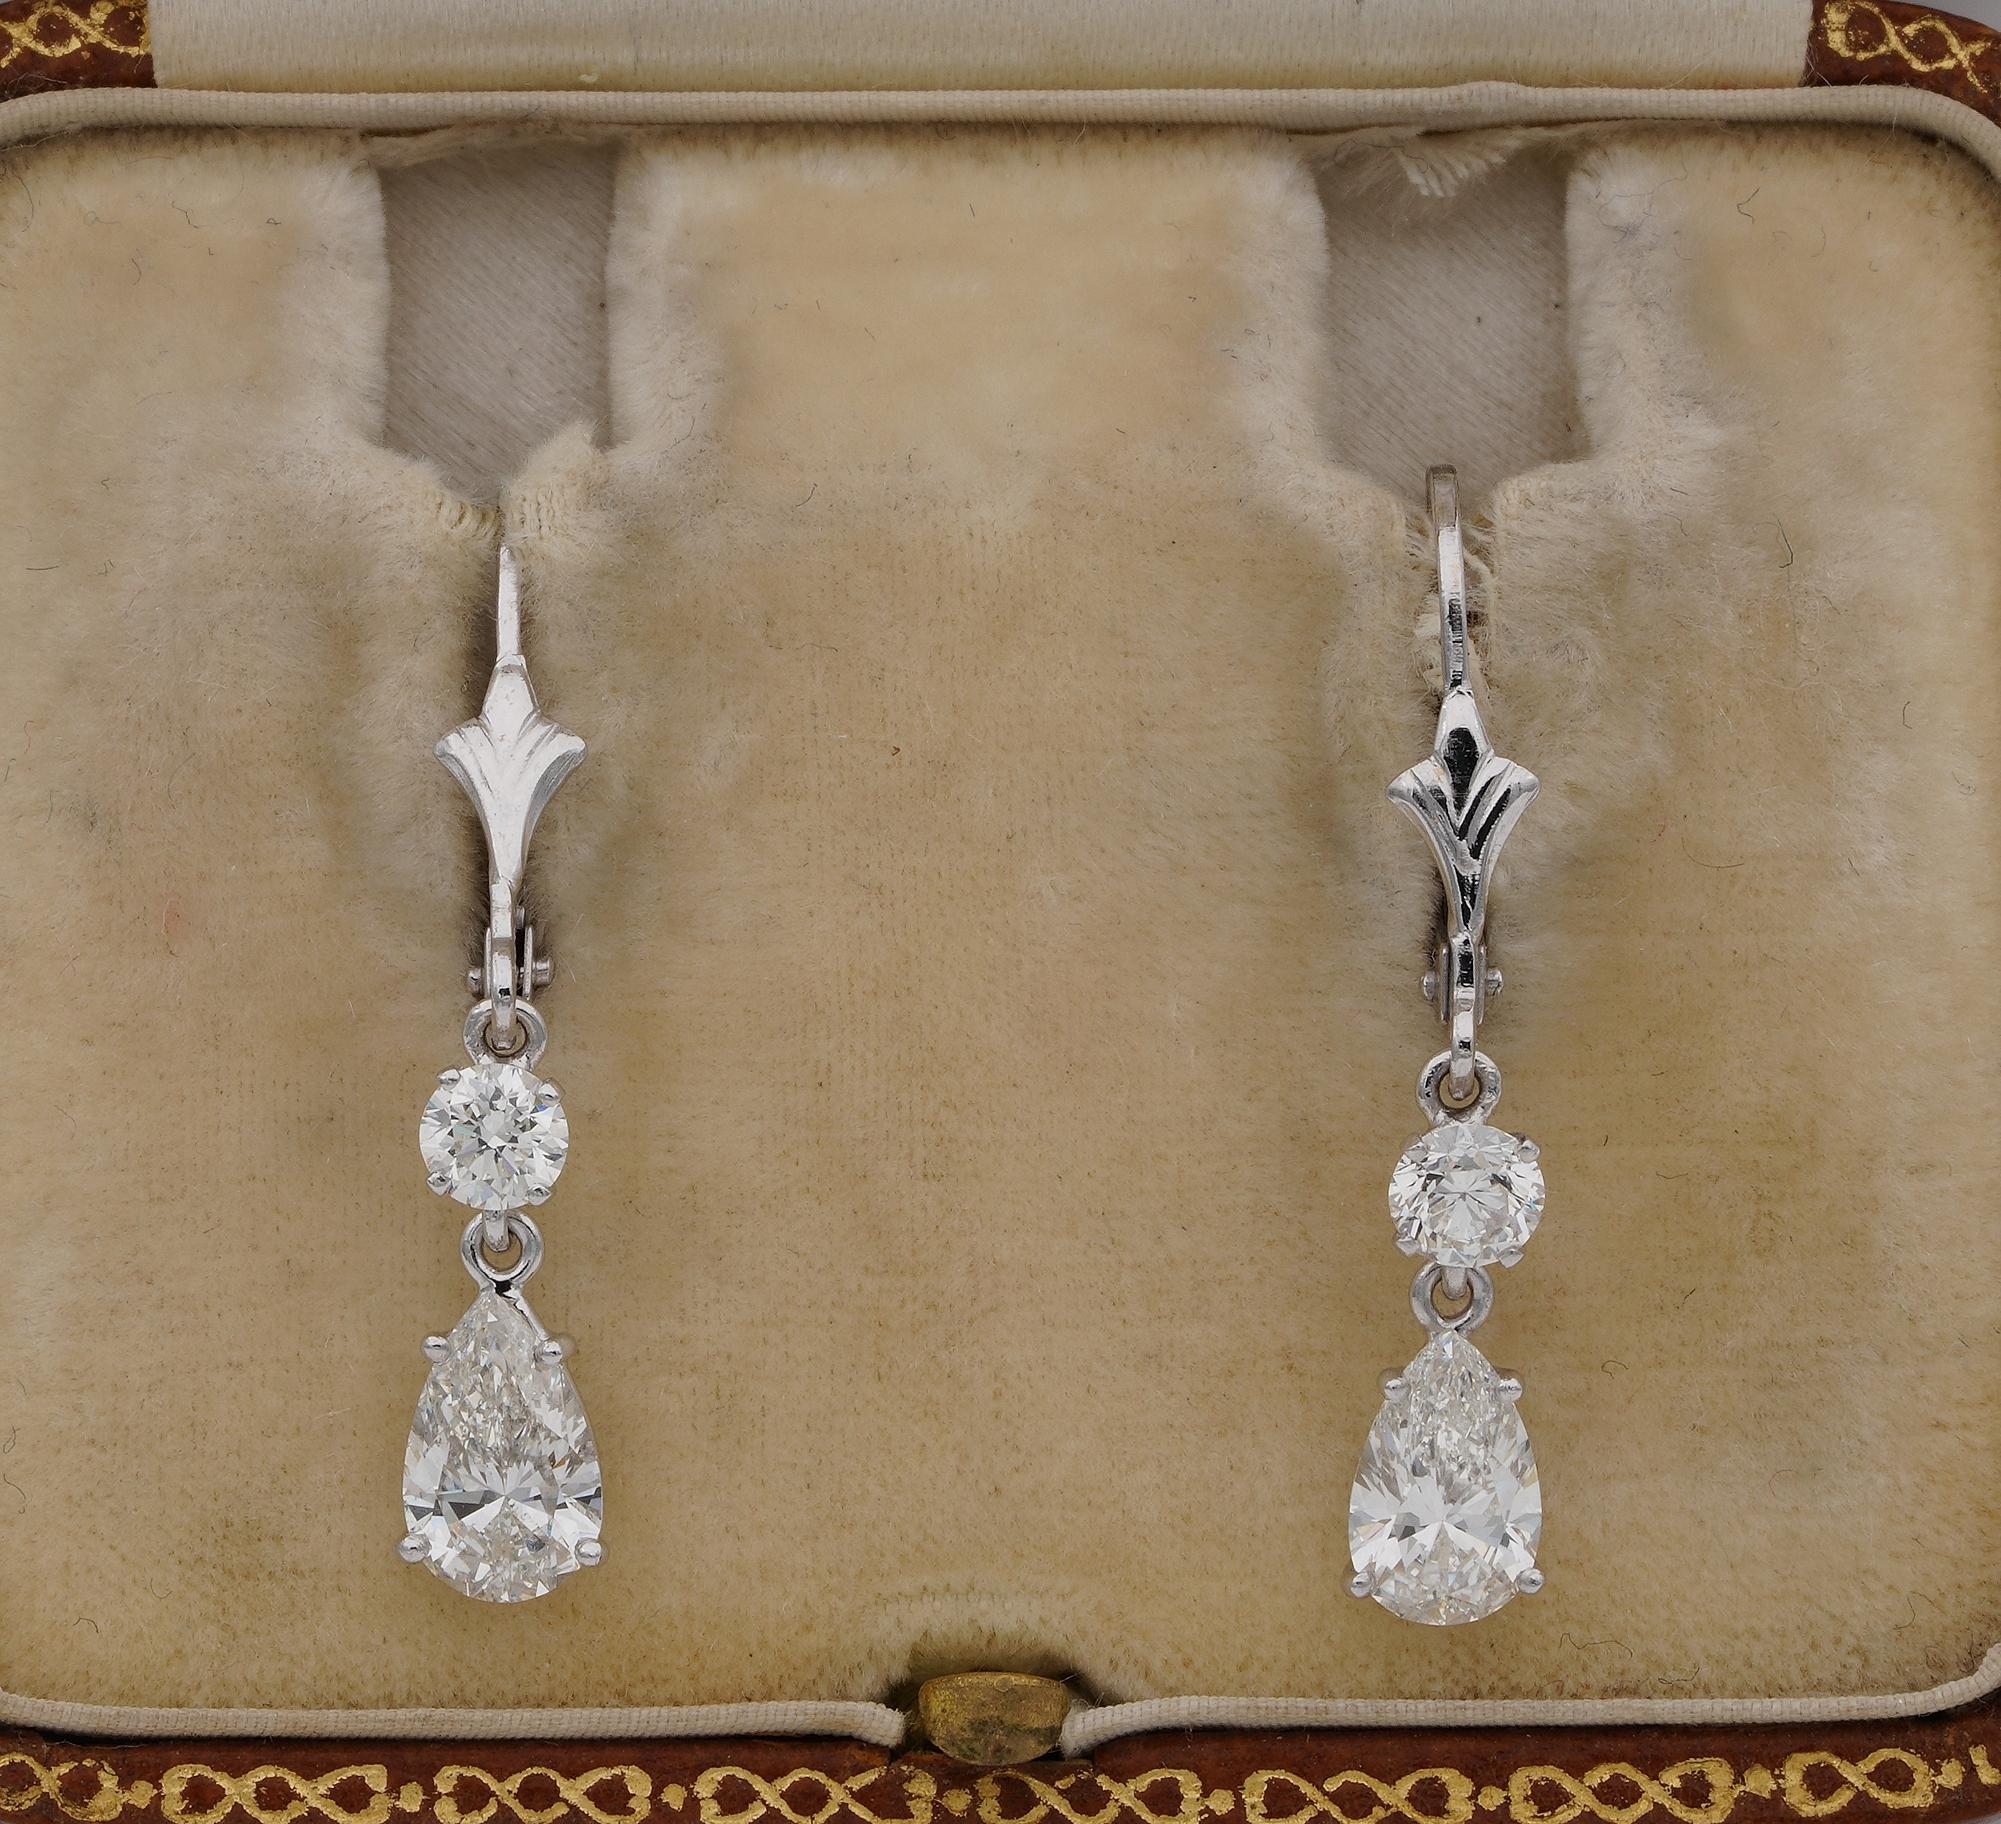 Glowing Sparkle!
Ravishing Diamond drop earrings pre 1980 – hand crafted of solid 18 Kt white gold with minimal amount of gold metal giving special lightness to the immense Diamond sparkle and gorgeous swing effect at any movement
Fleur de lis top